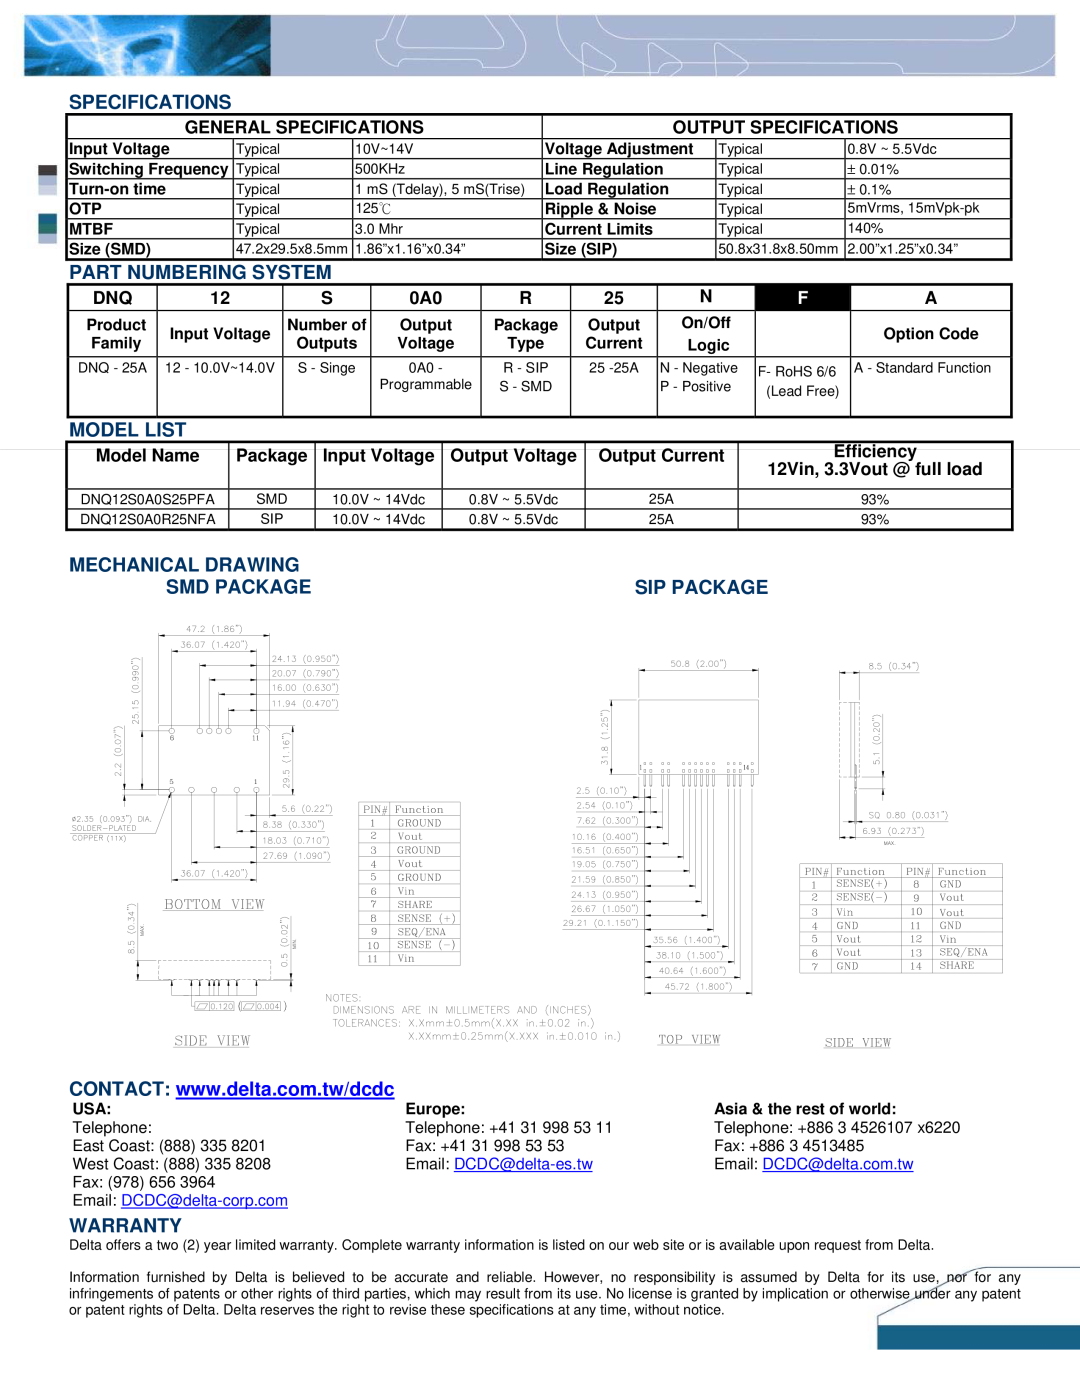 Delta Electronics DNQ12 Specifications, Part Numbering System, Model List, Mechanical Drawing, Smd Package, Sip Package 